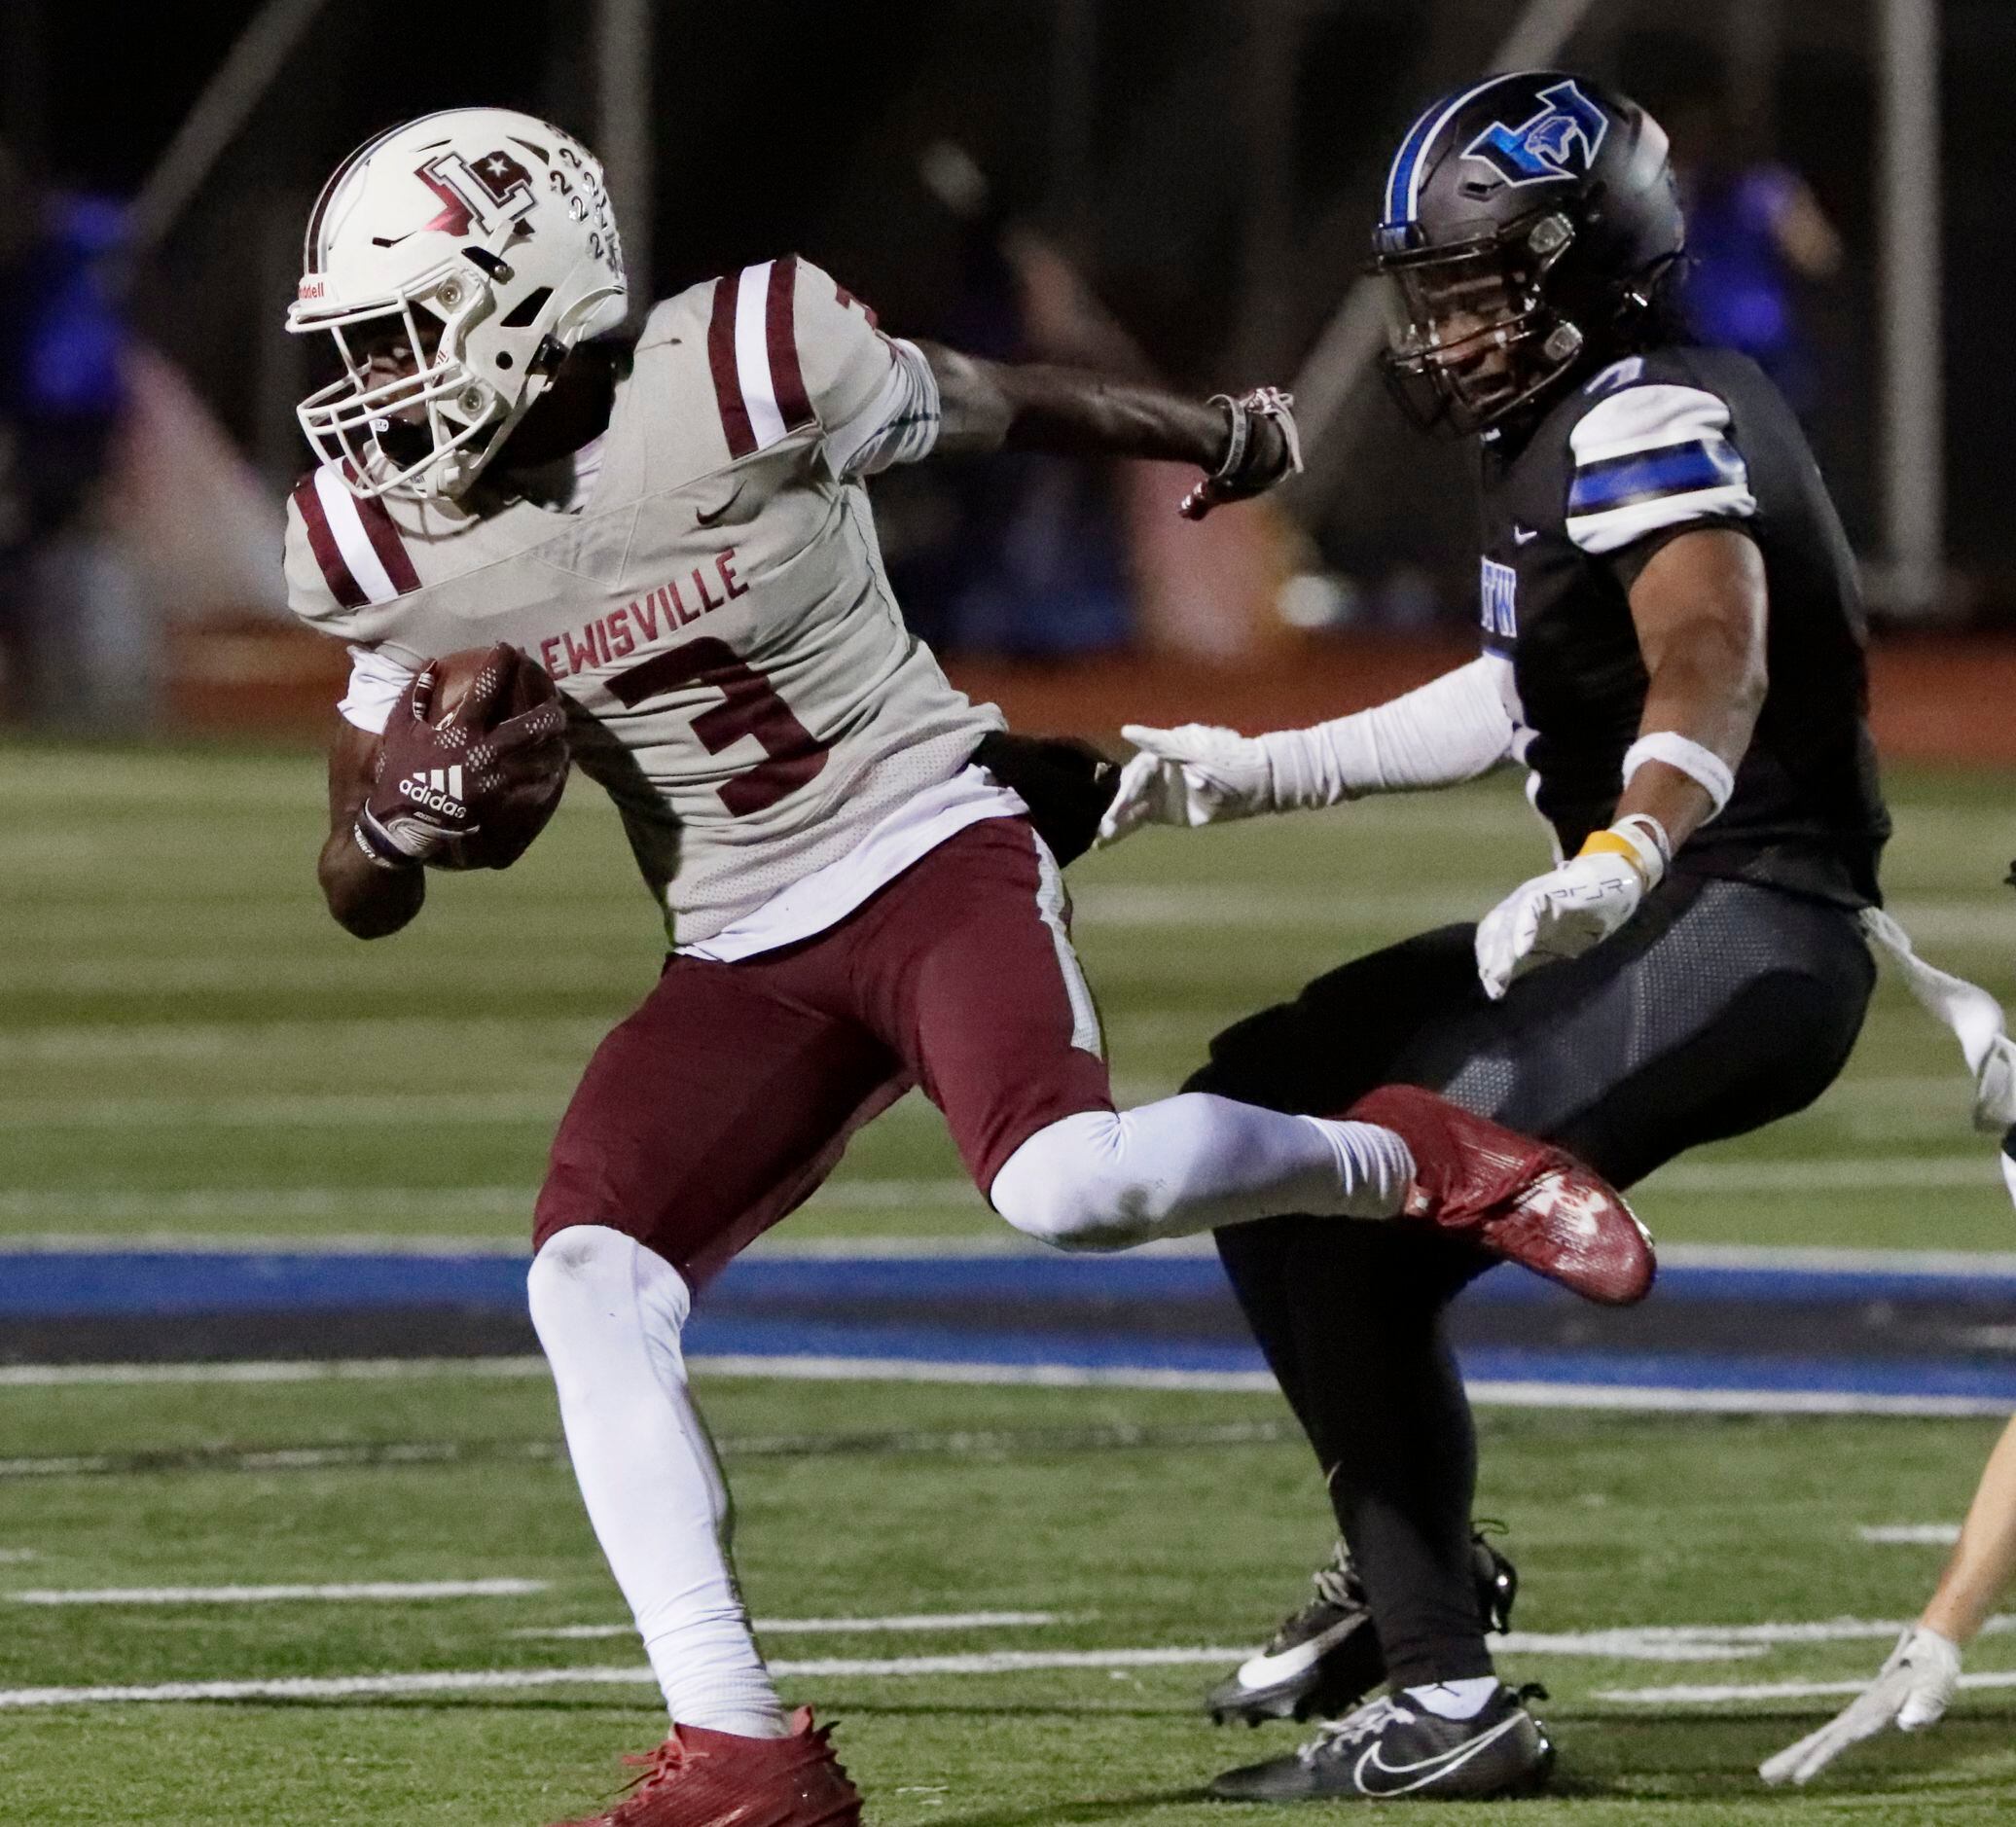 Lewisville High School wide receiver Tye Miller (3) turns to run after the catch in front of...